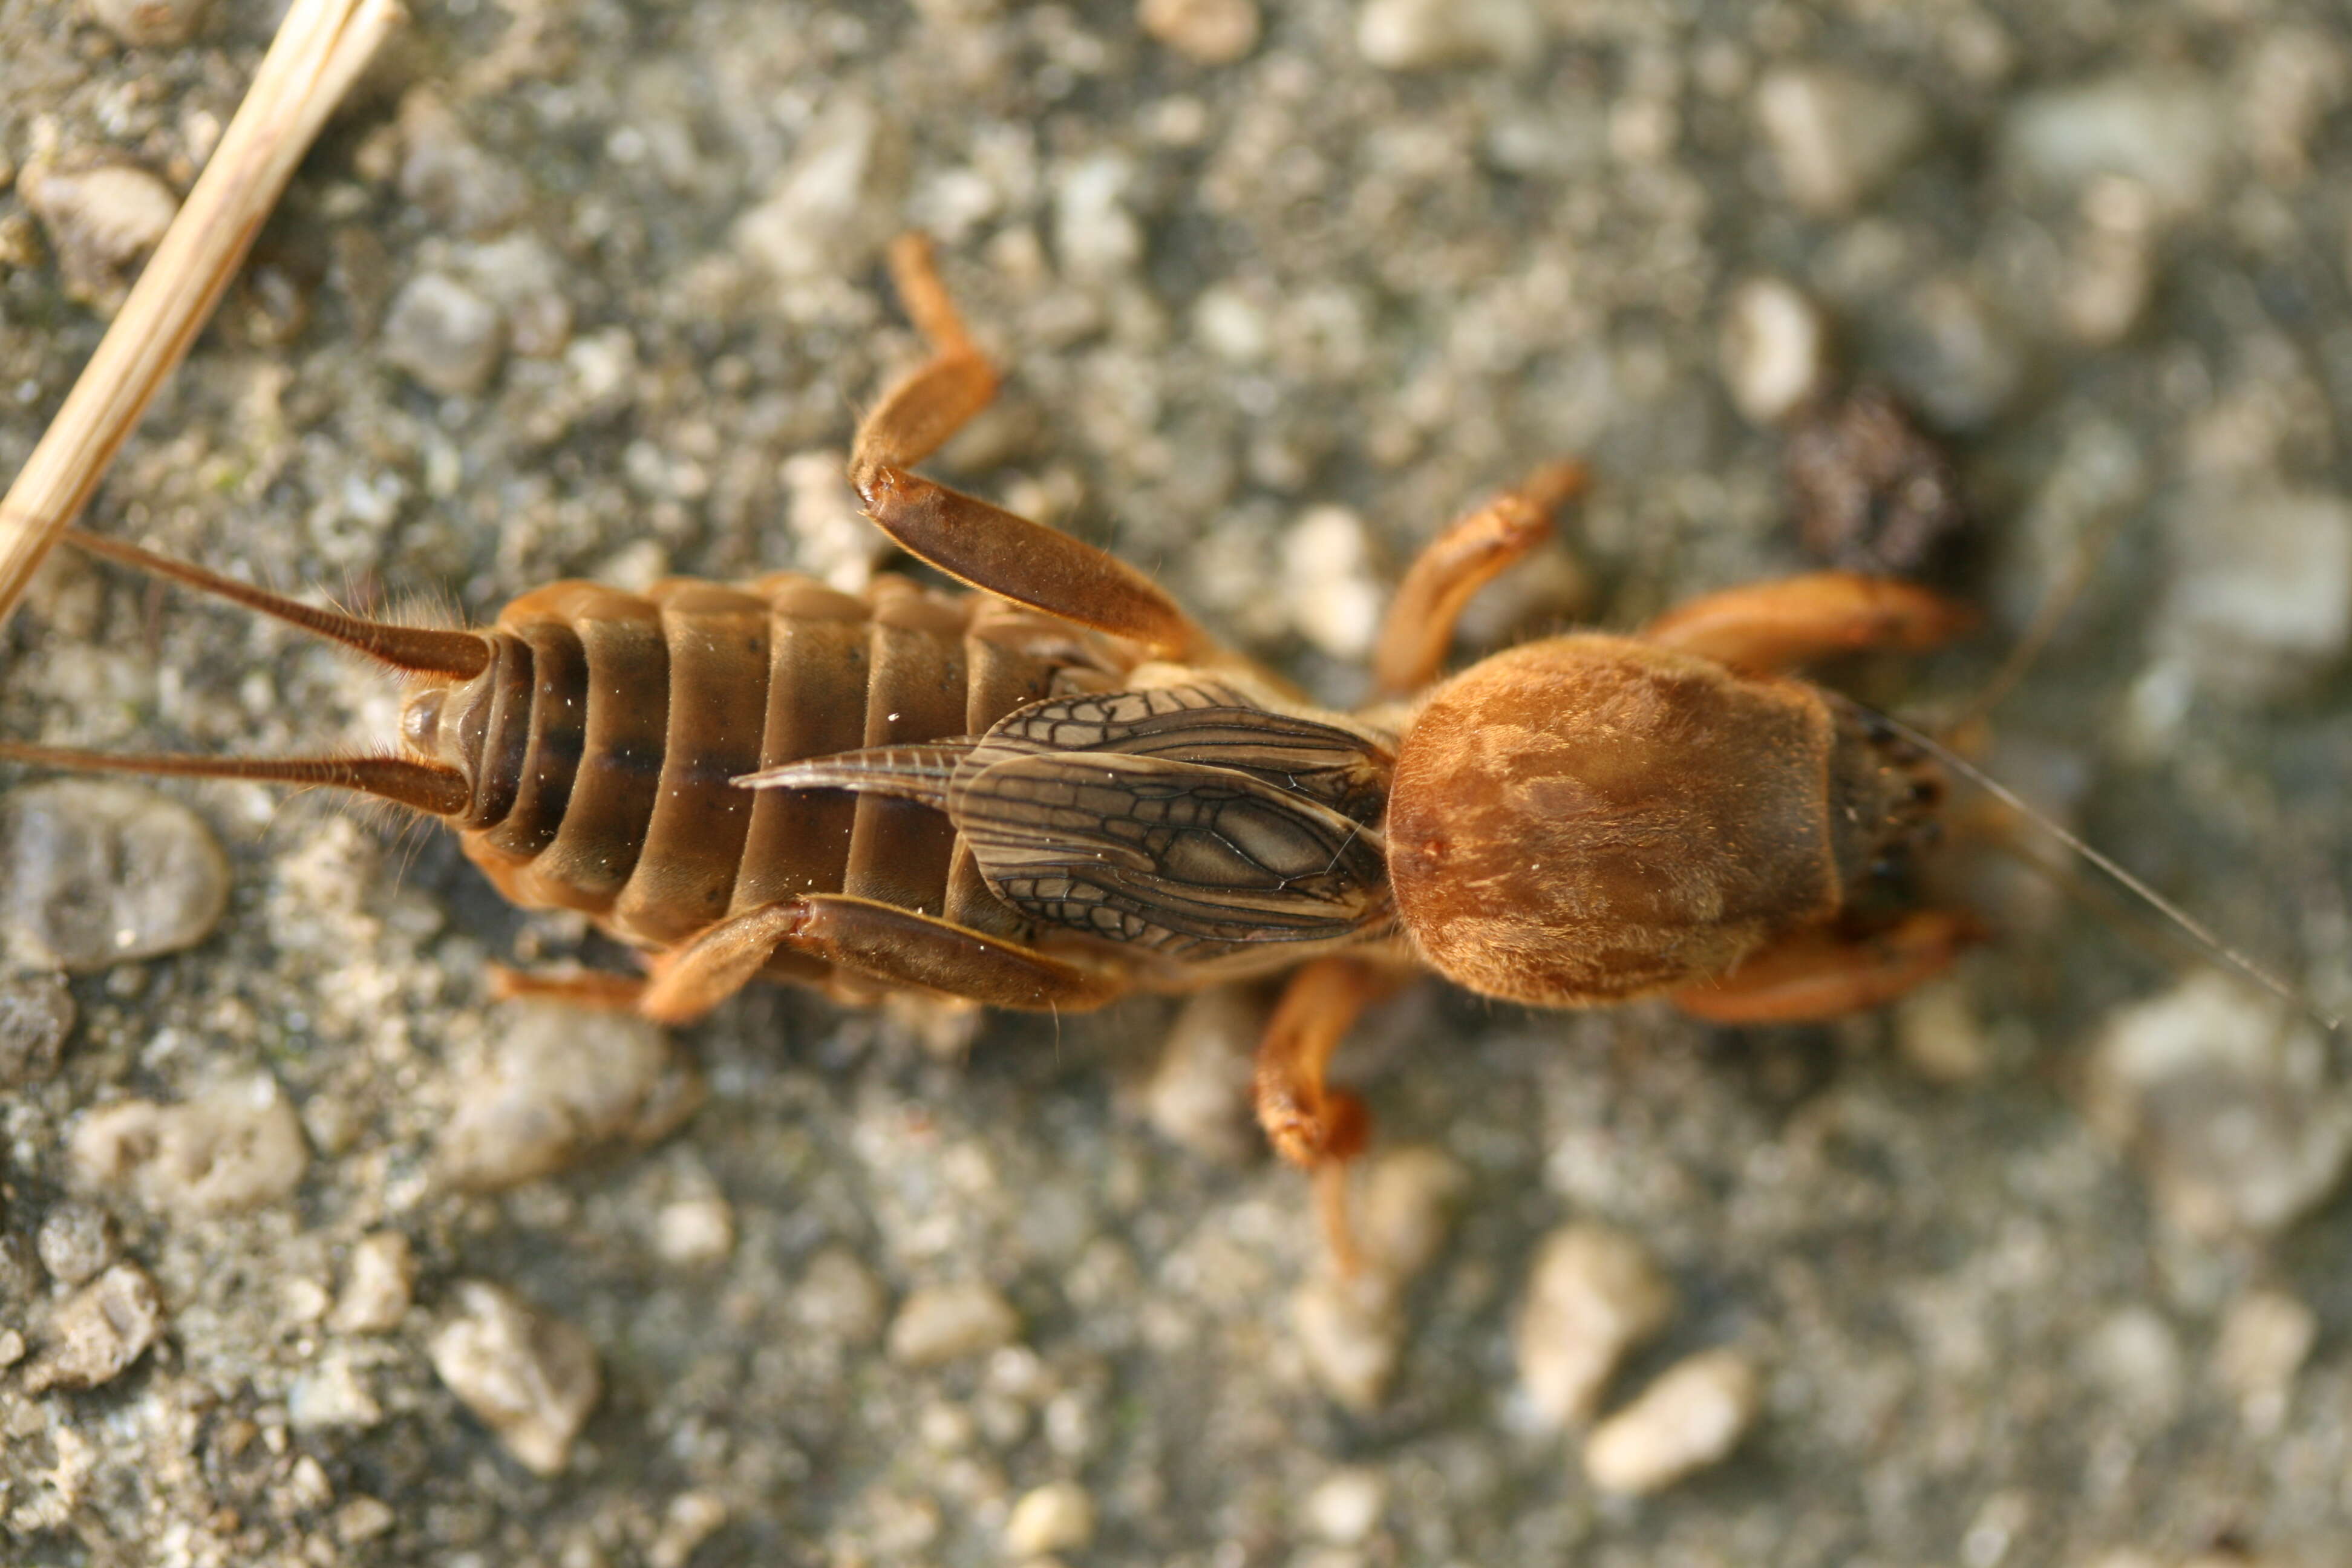 Image of Northern Mole Crickets